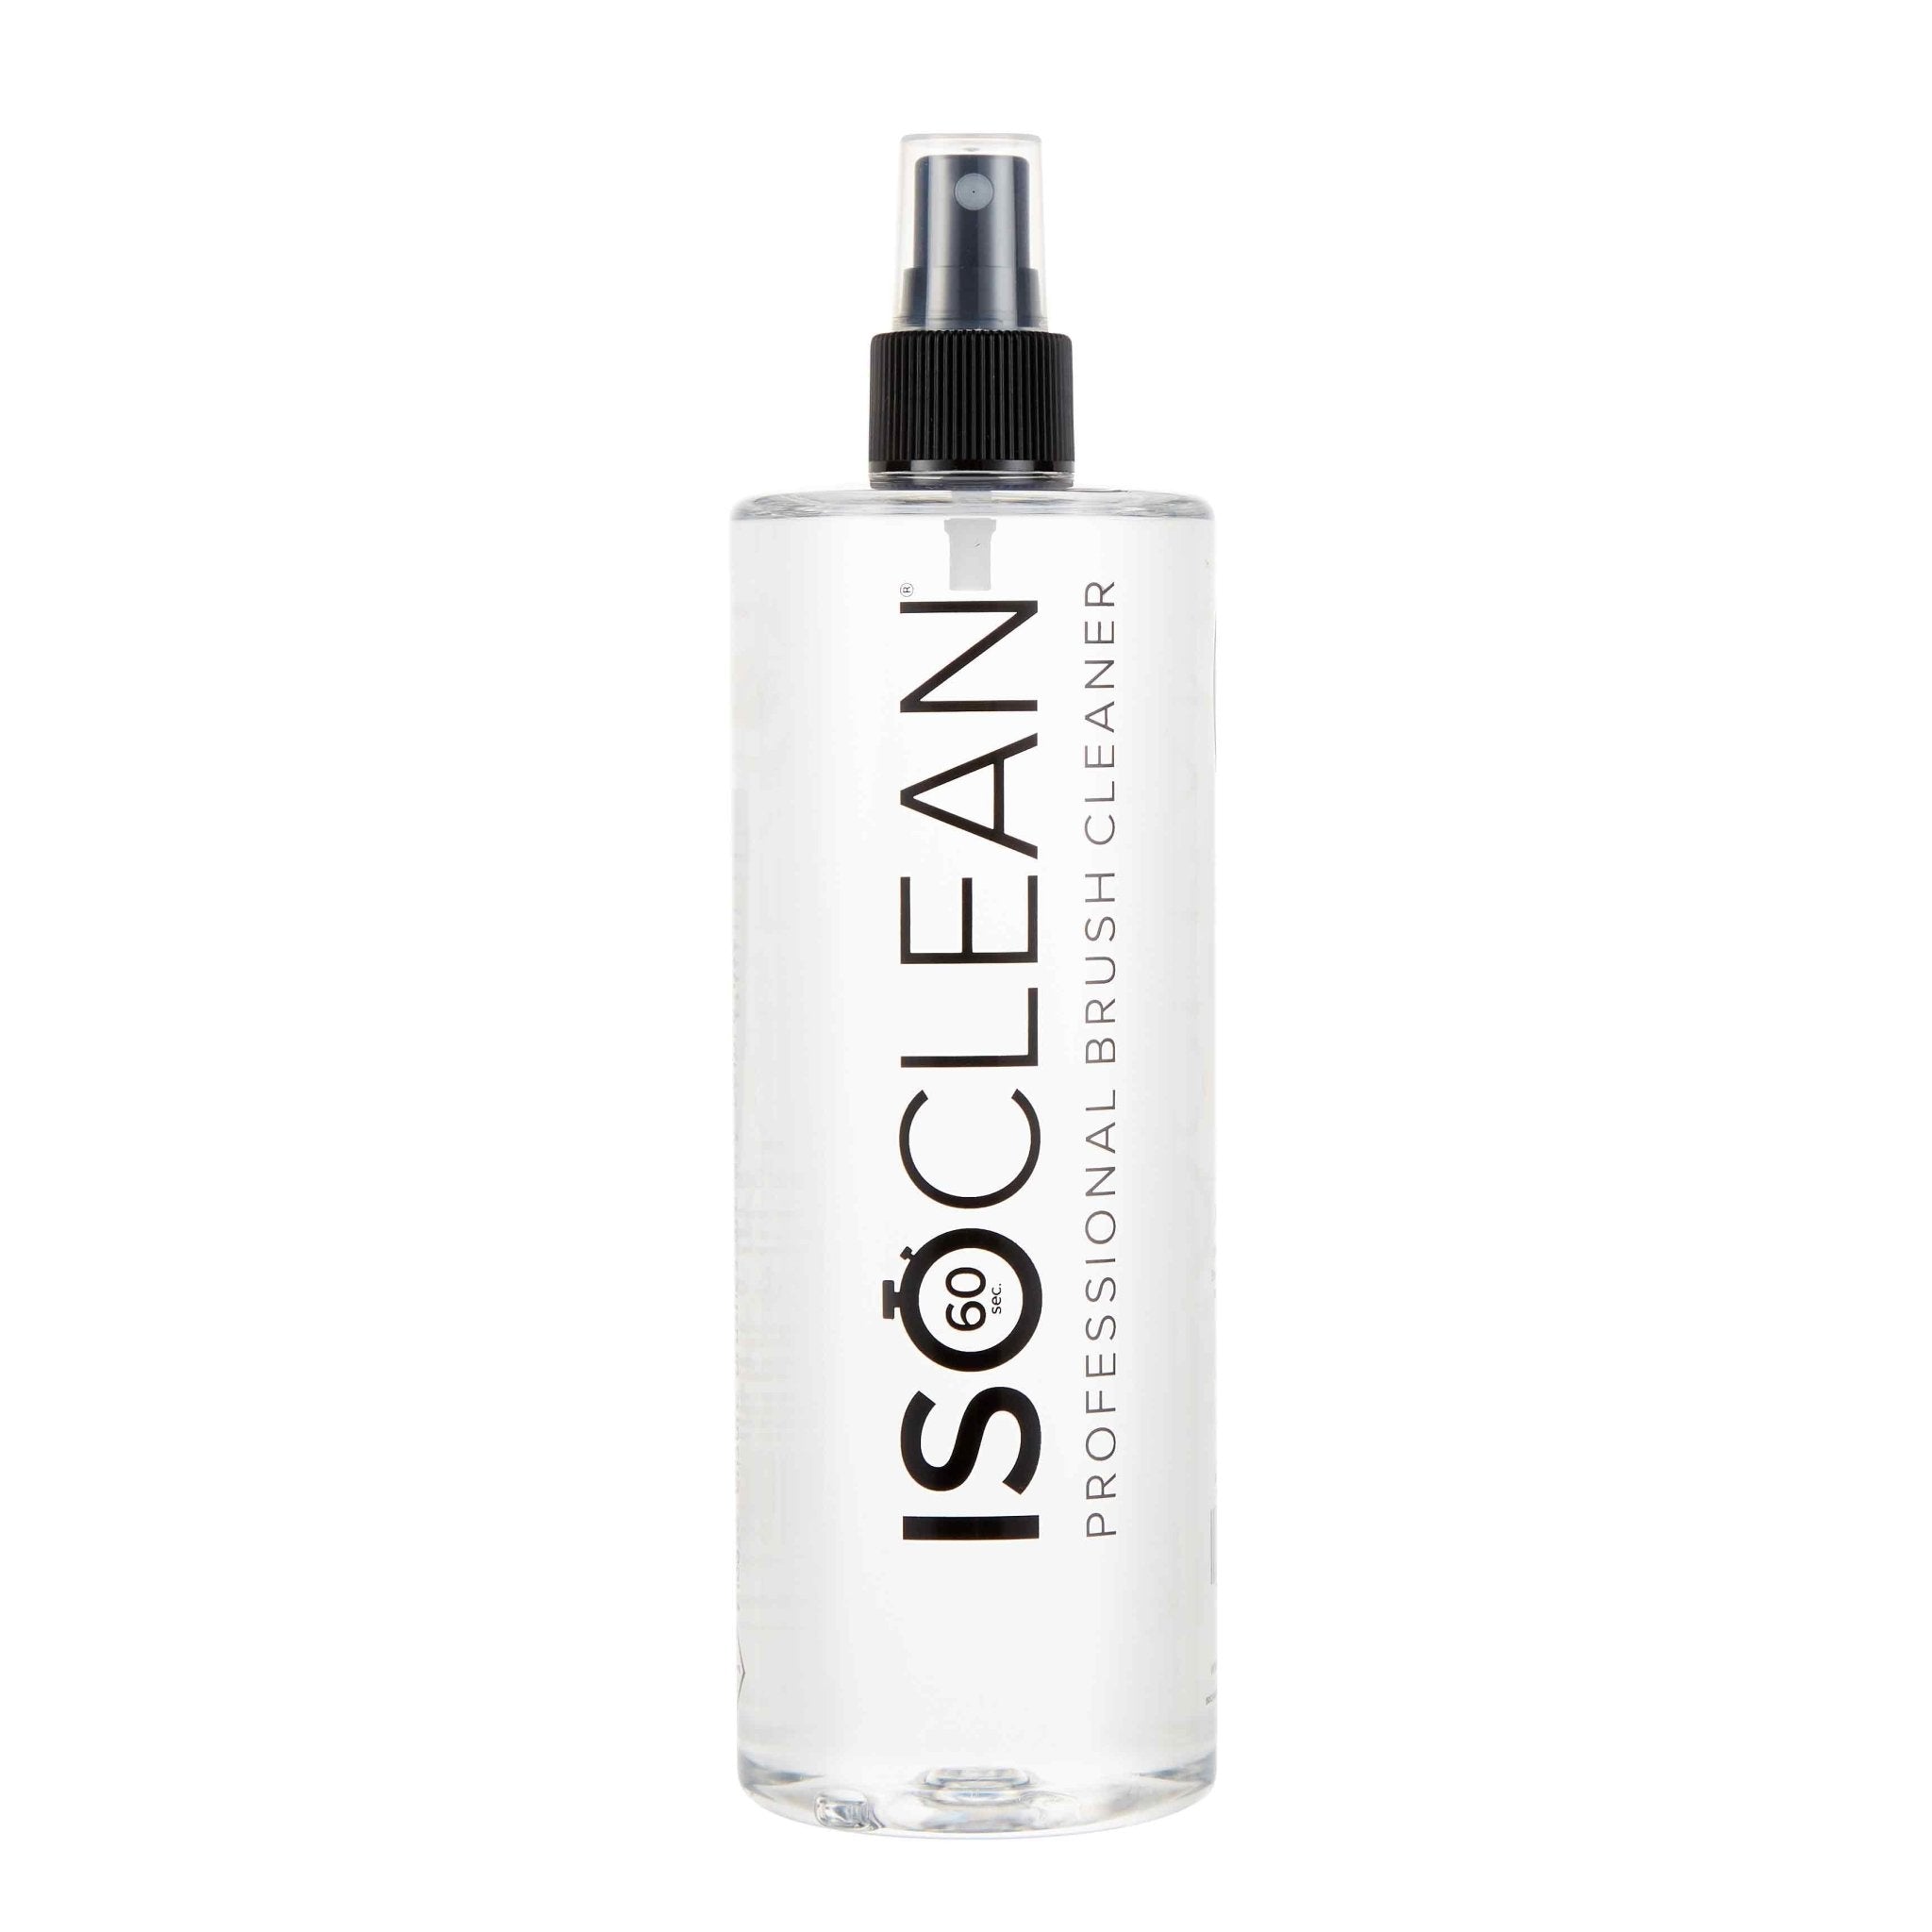 ISOCLEAN Makeup Brush Cleaner with Spray Top (110ml, 275ml, 525ml Bott